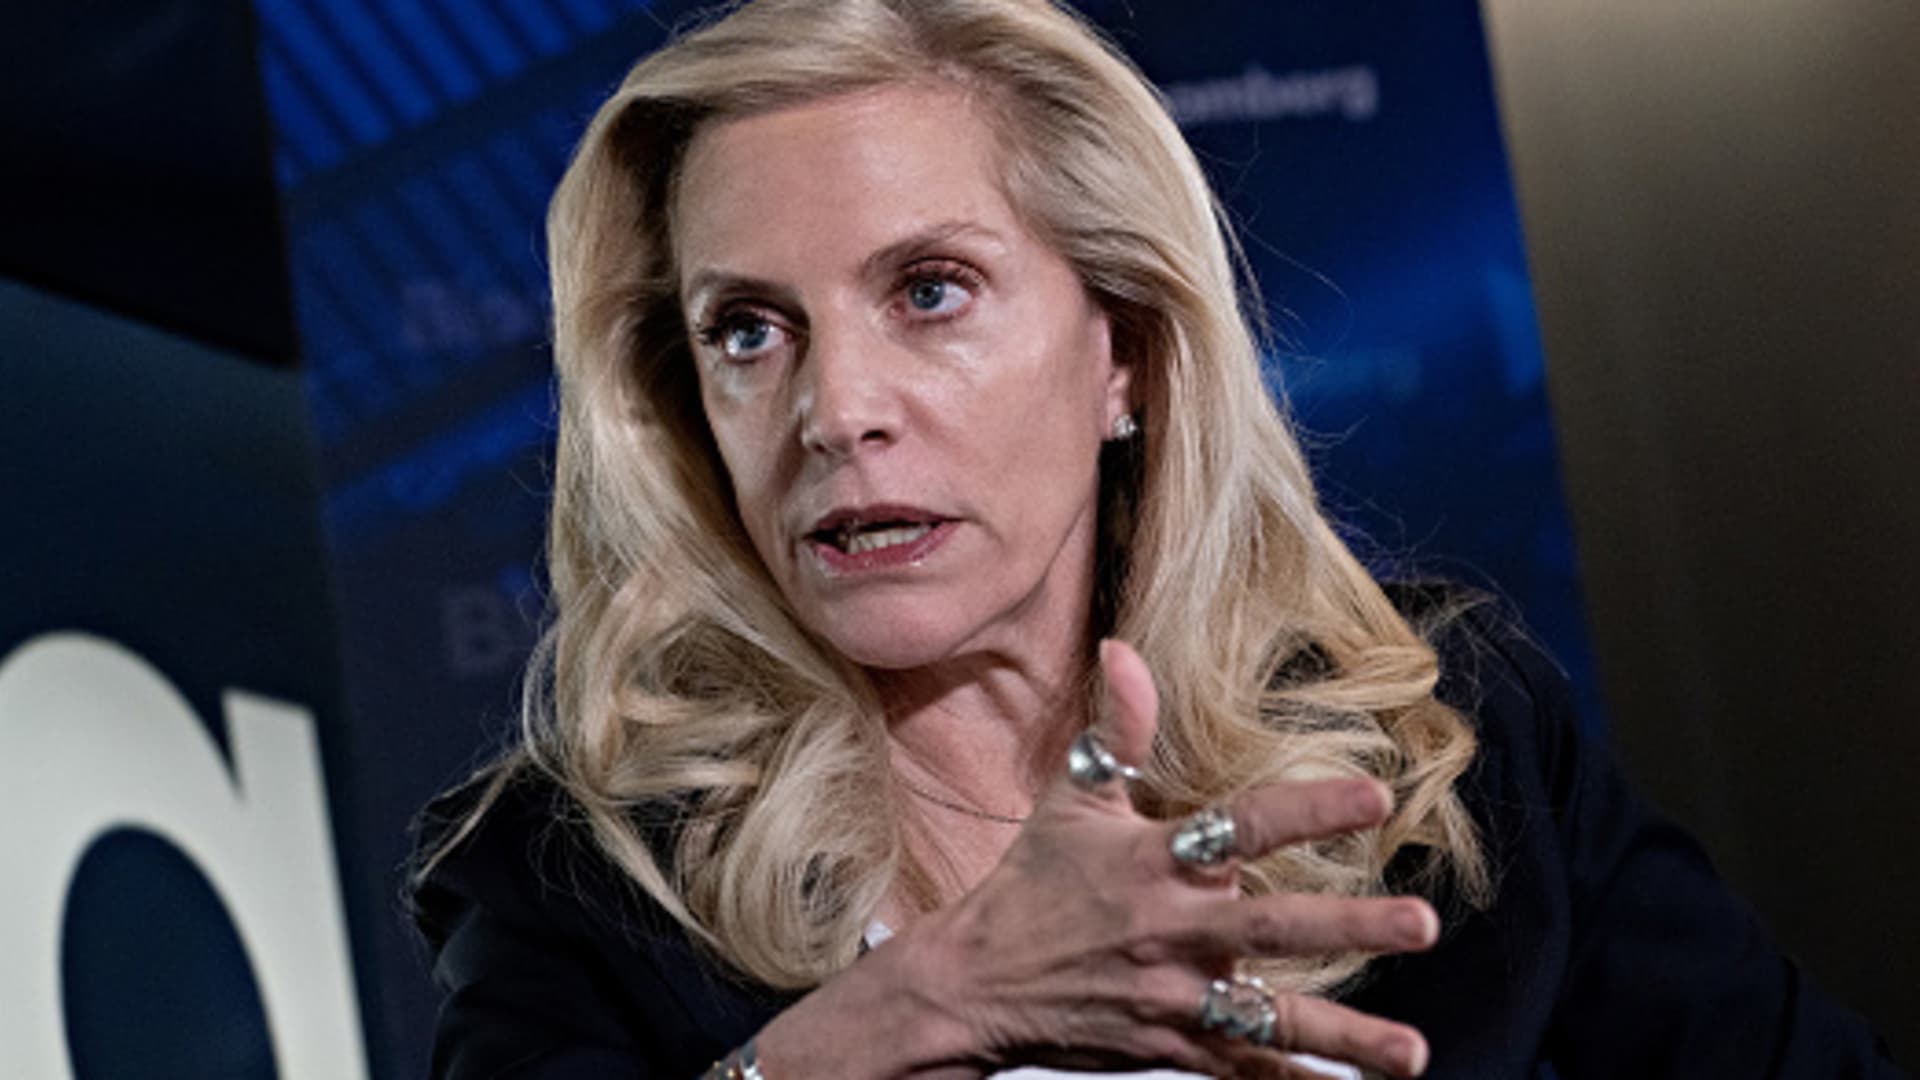 Fed Vice Chair Brainard says it may 'soon' be appropriate to move to slower pace of rate hikes